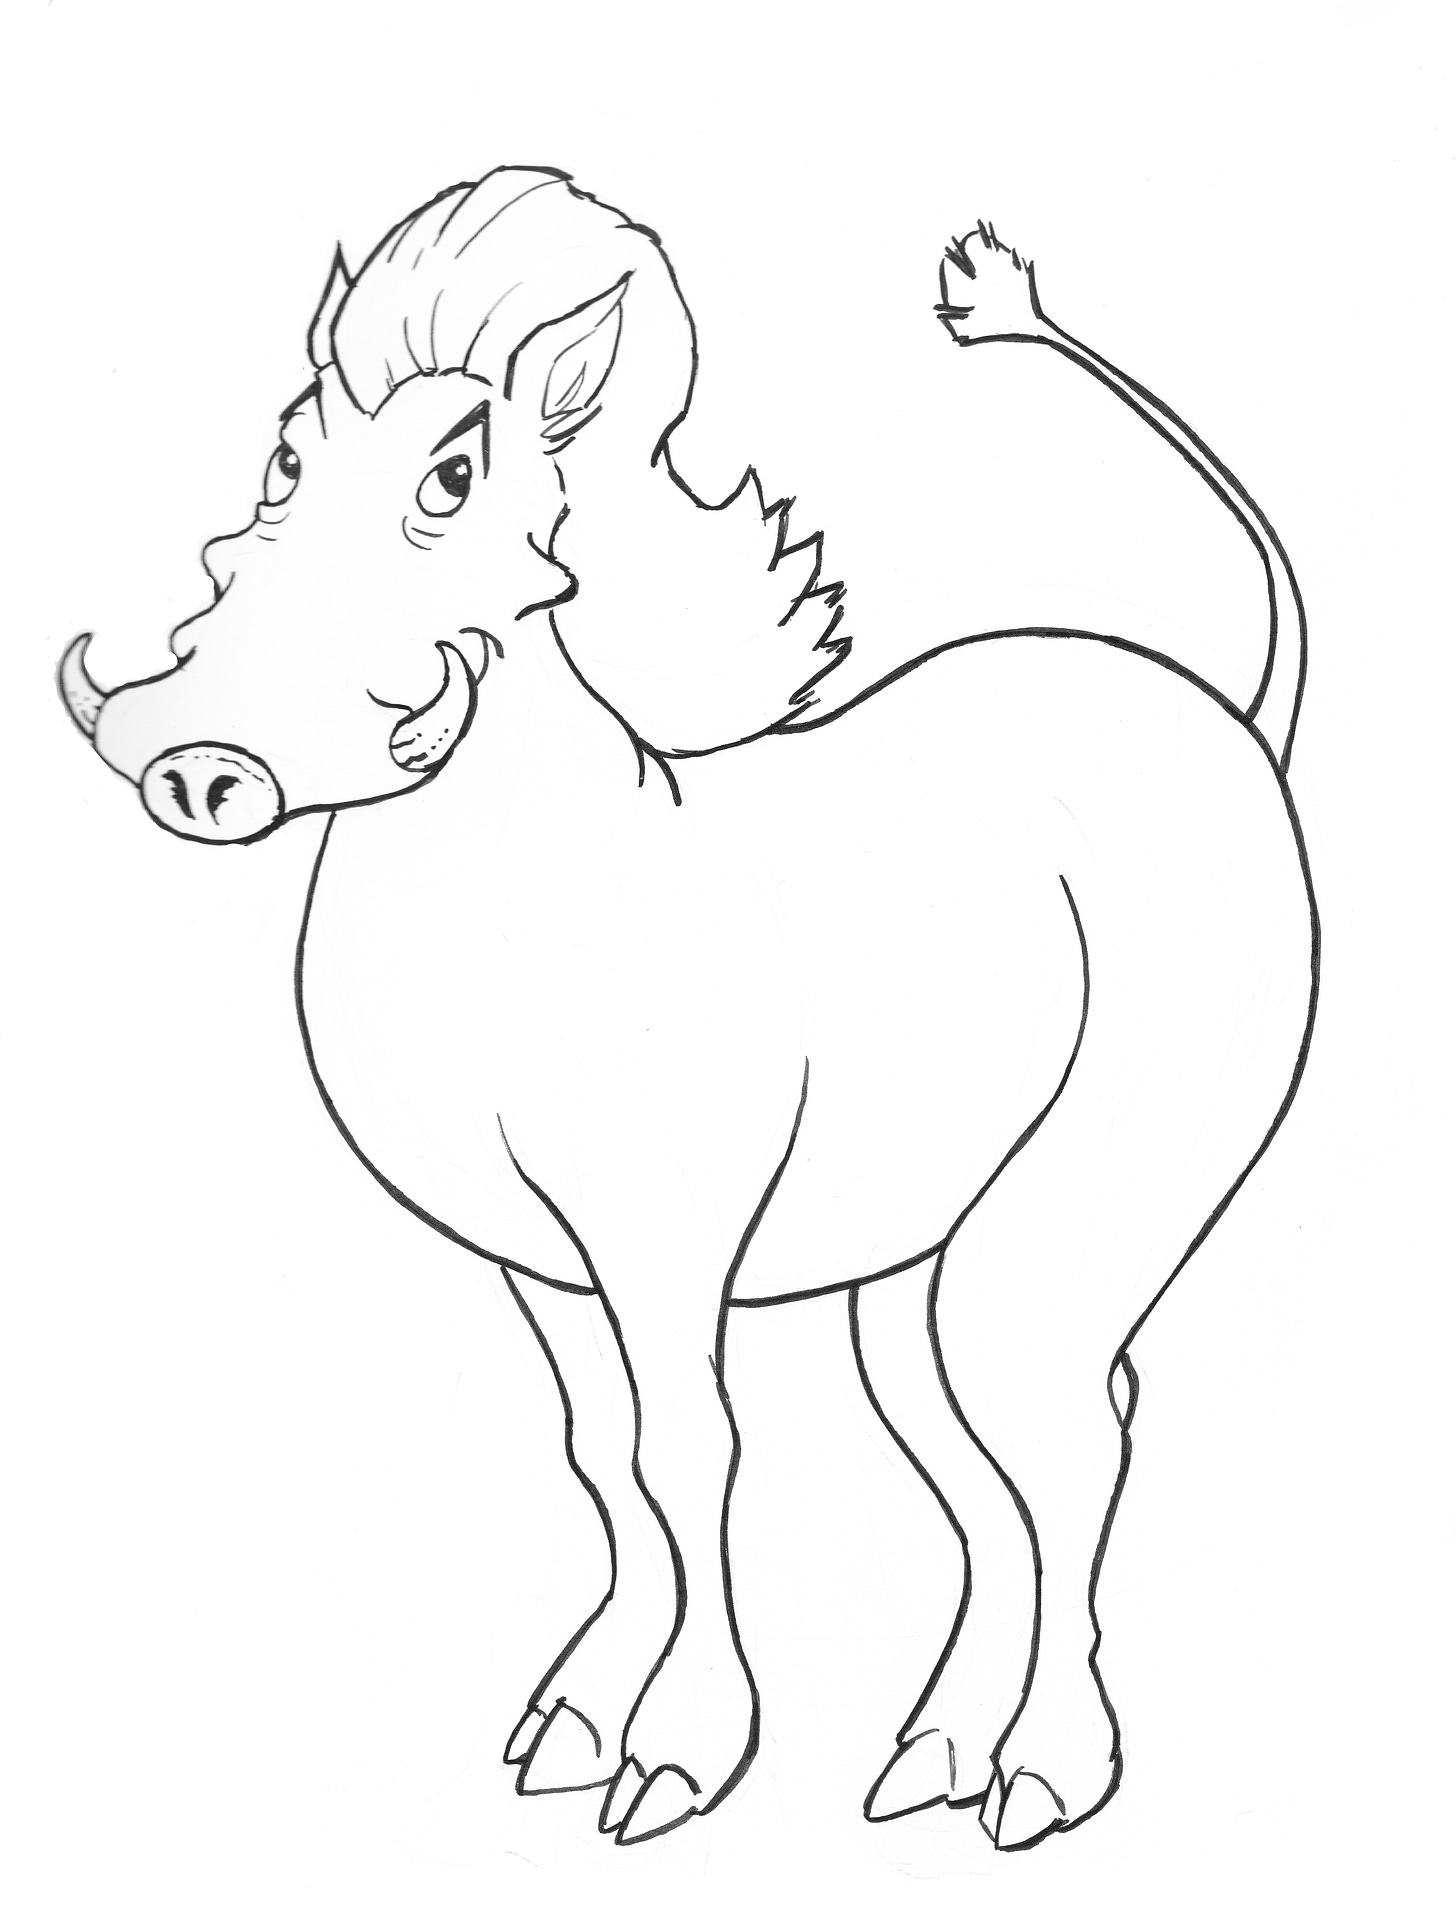 Line drawing of a proud warthog with a large pouffy mane of hair and a raised tail.